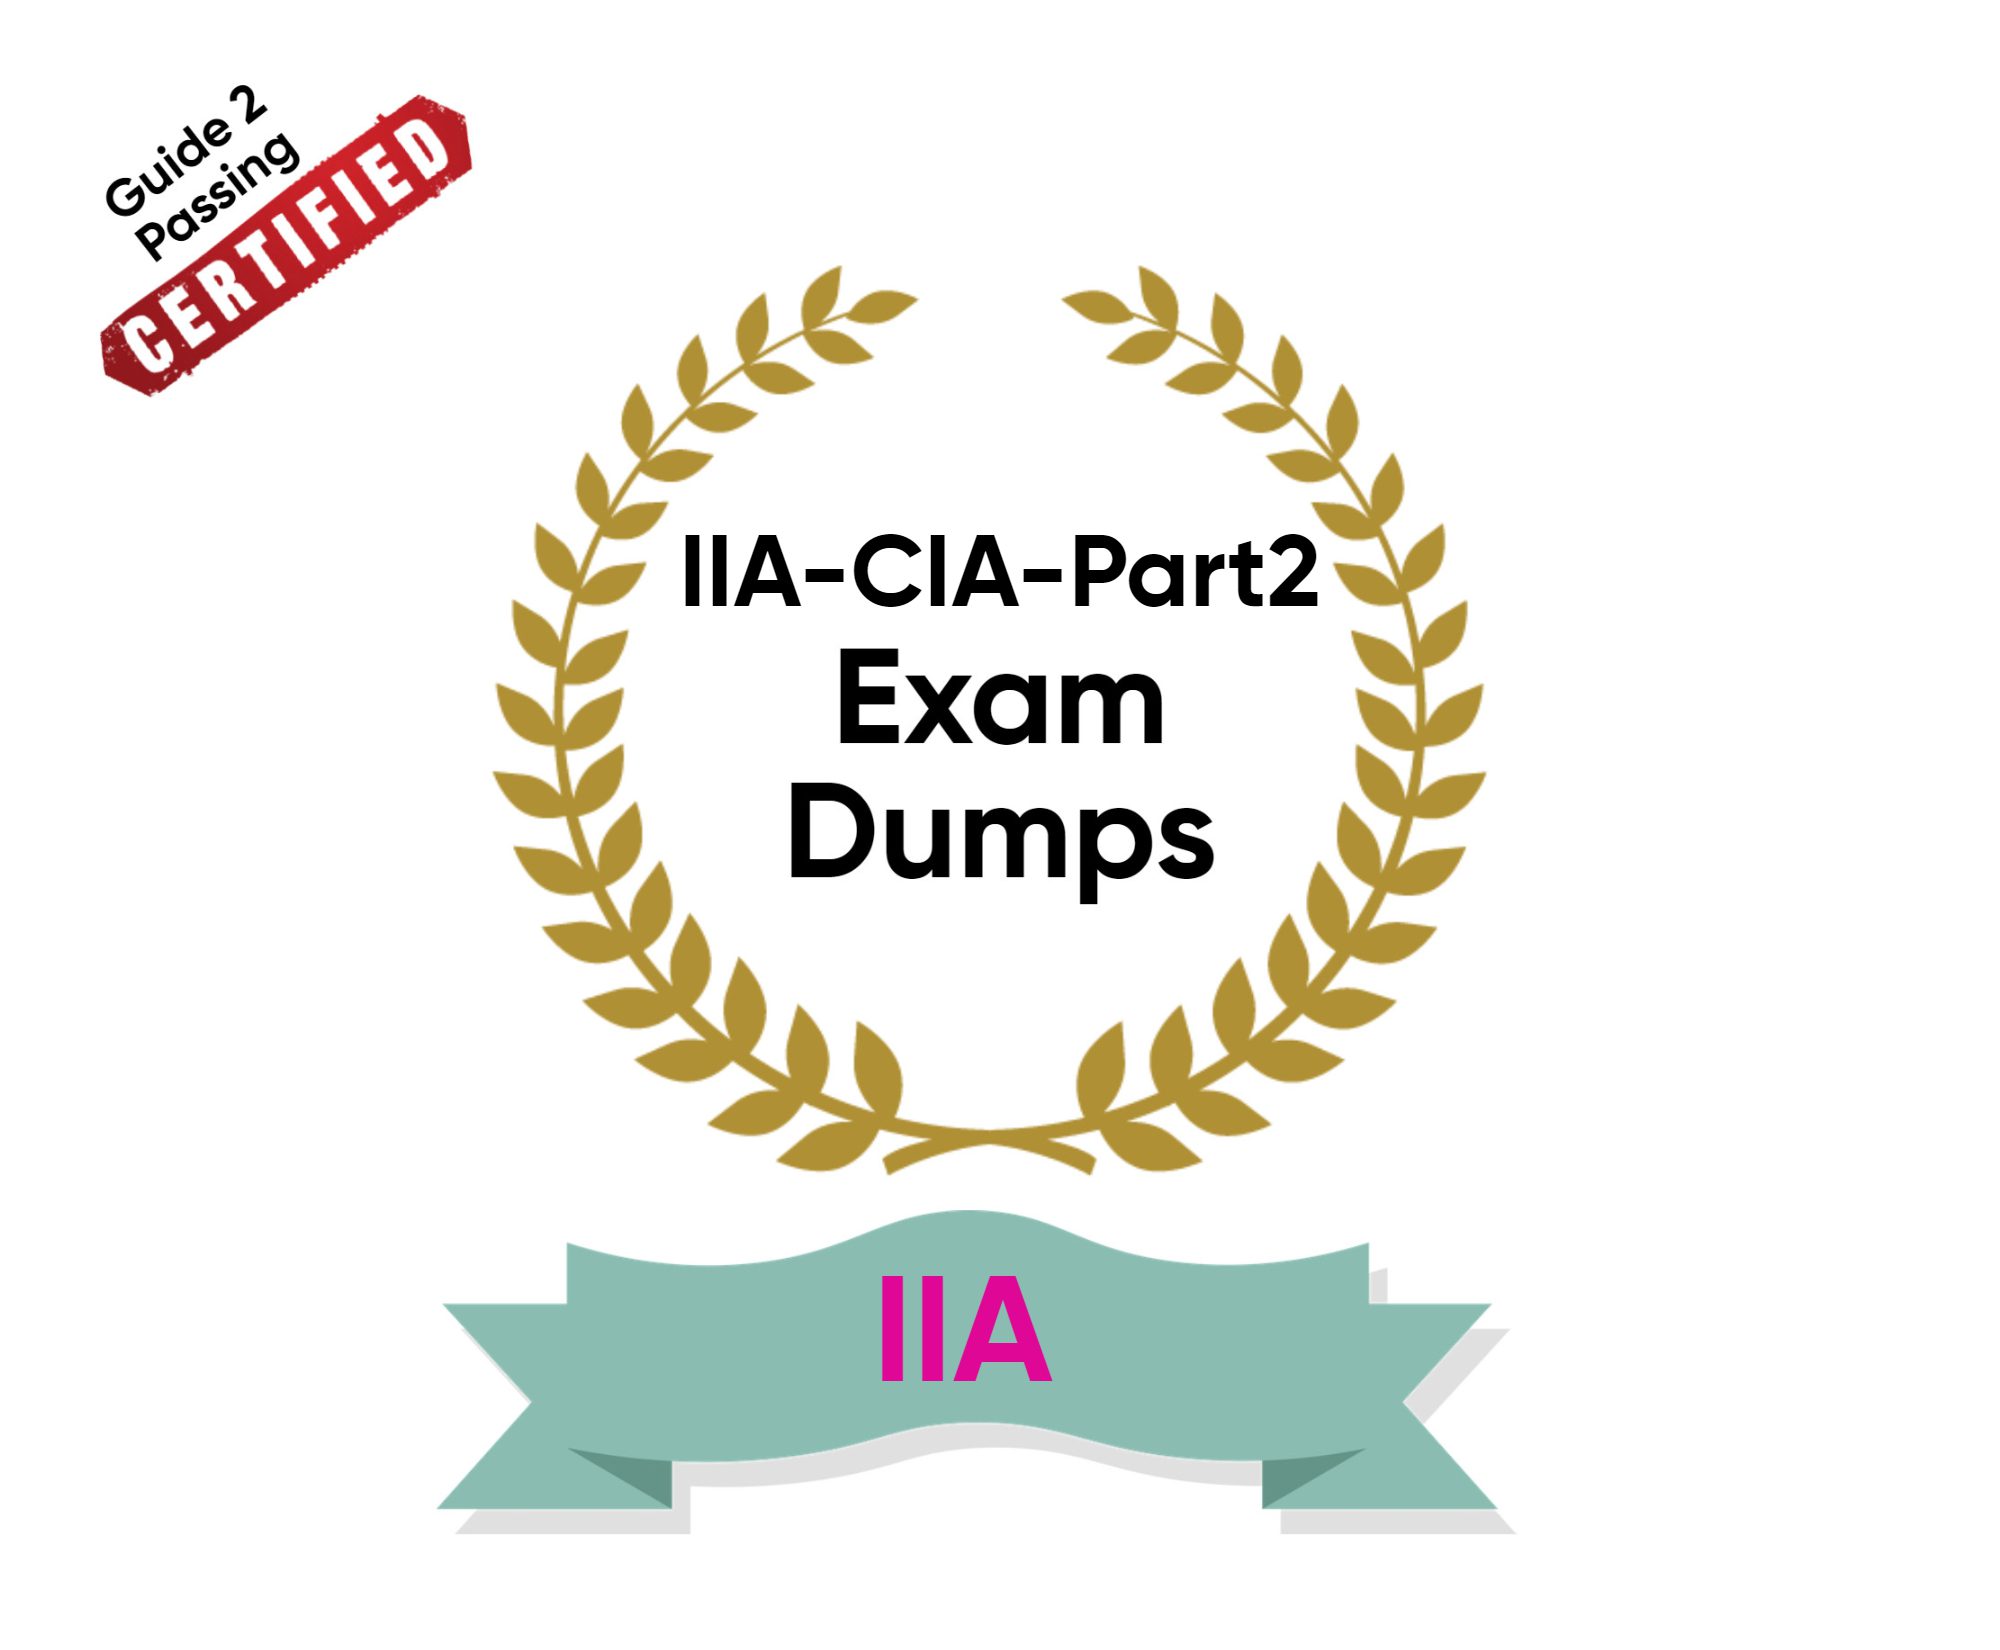 Pass Your IIA IIA-CIA-Part2 Exam Dumps From Guide 2 Passing